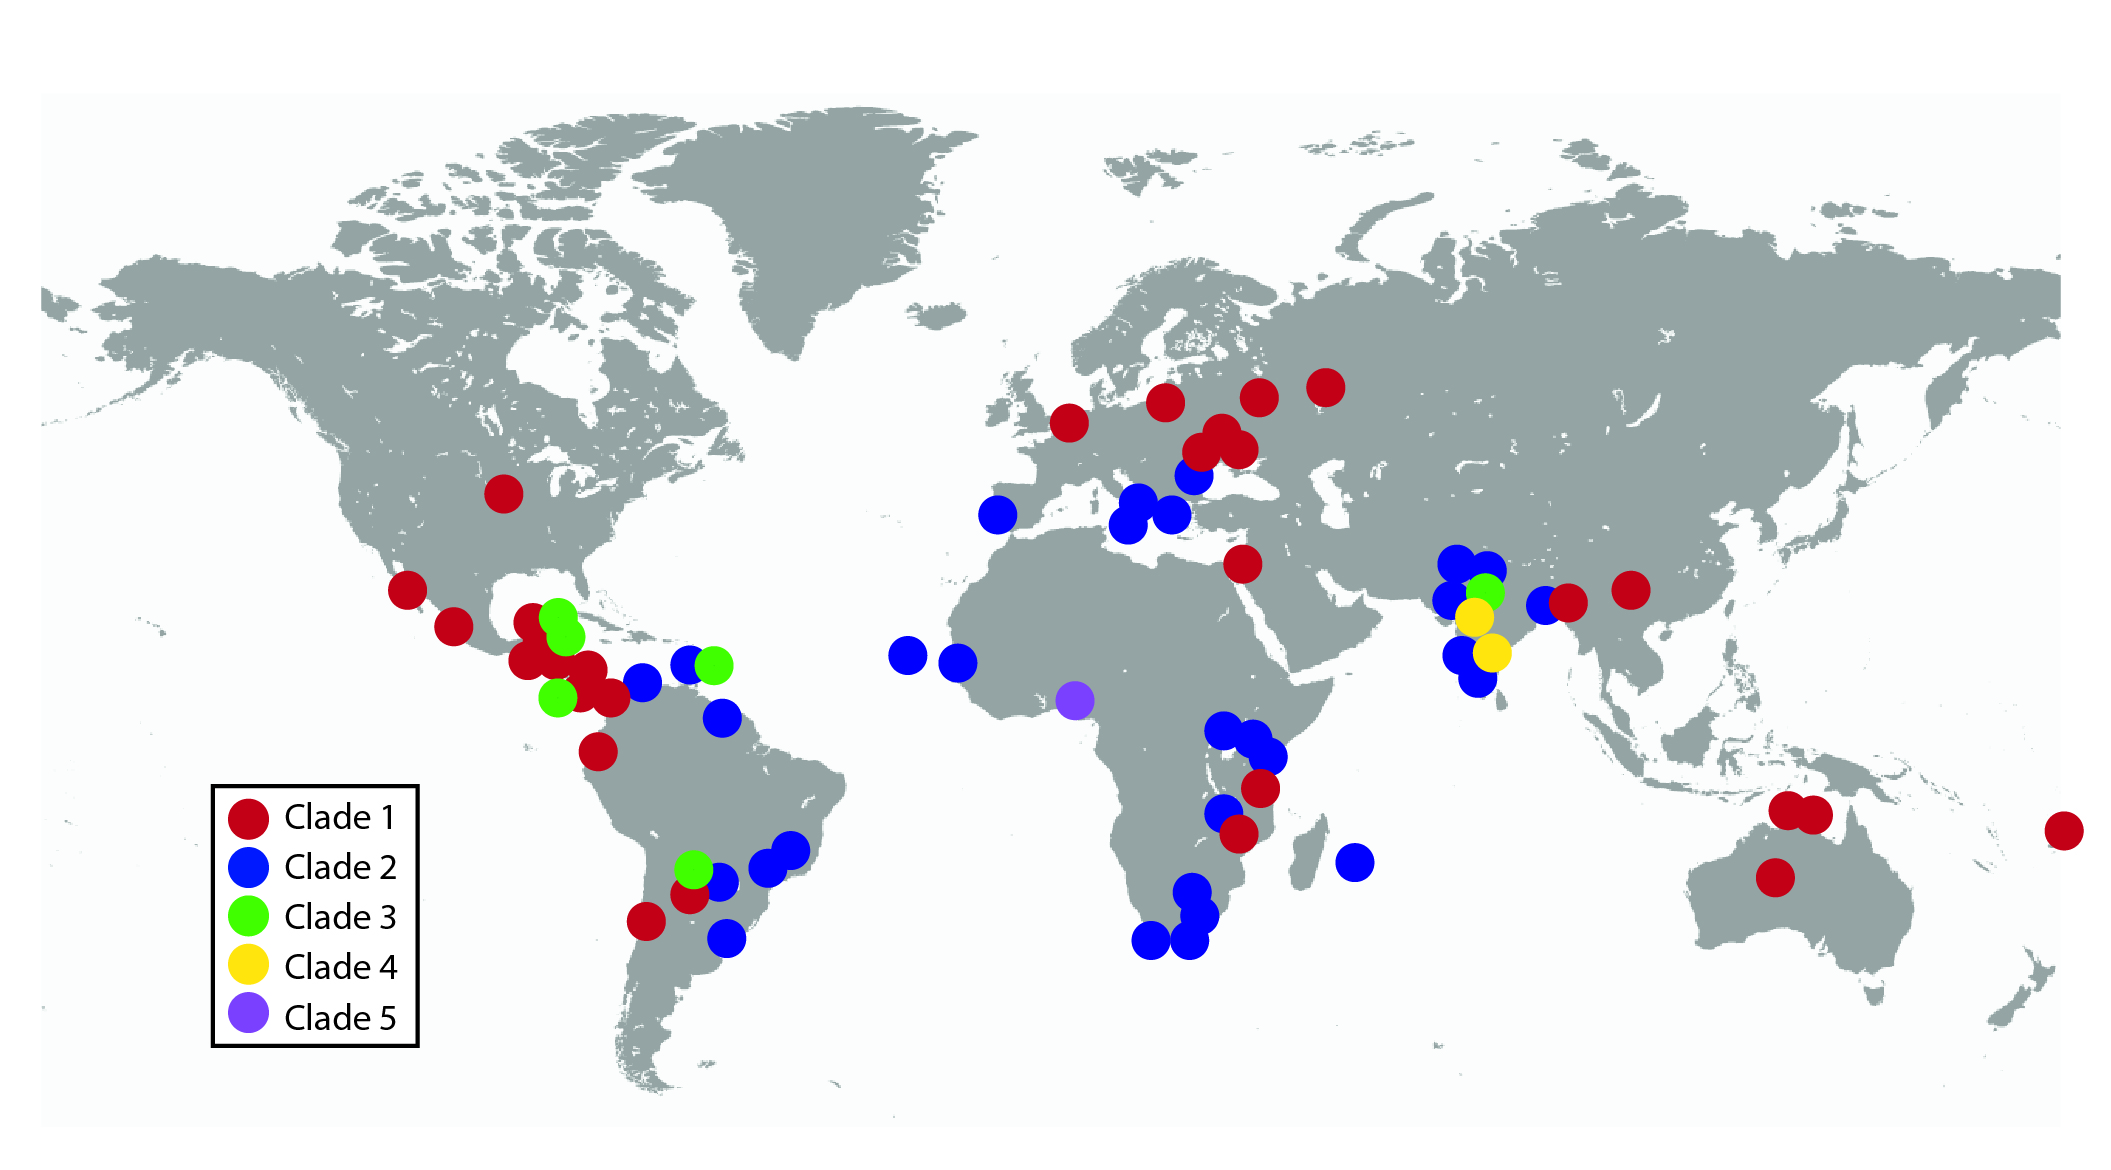 Five CTVT genetic lineages, or “clades”, and their distribution around the world.